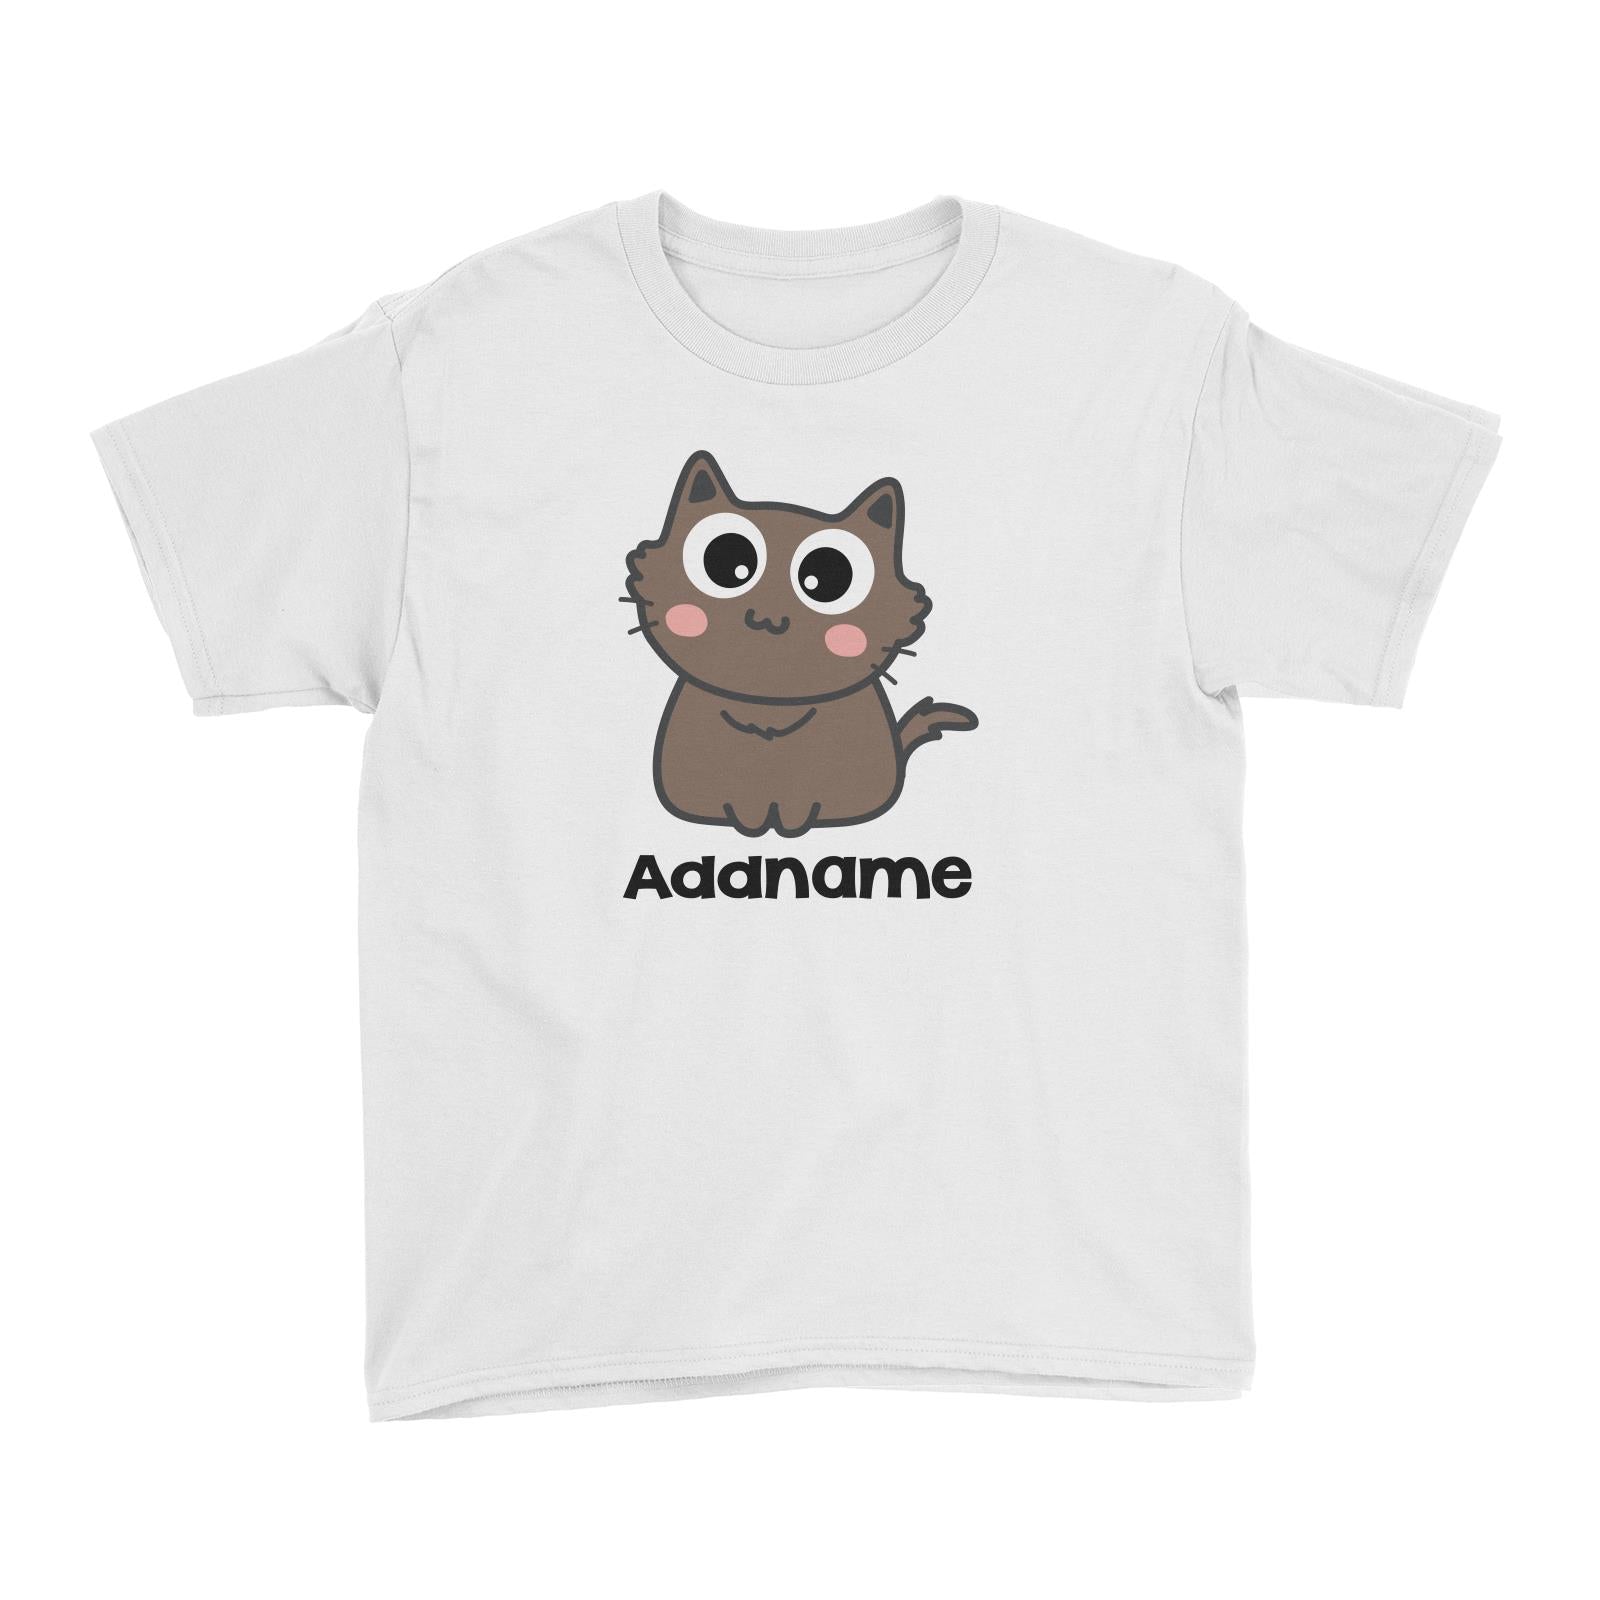 Drawn Adorable Cats Chocolate Addname Kid's T-Shirt